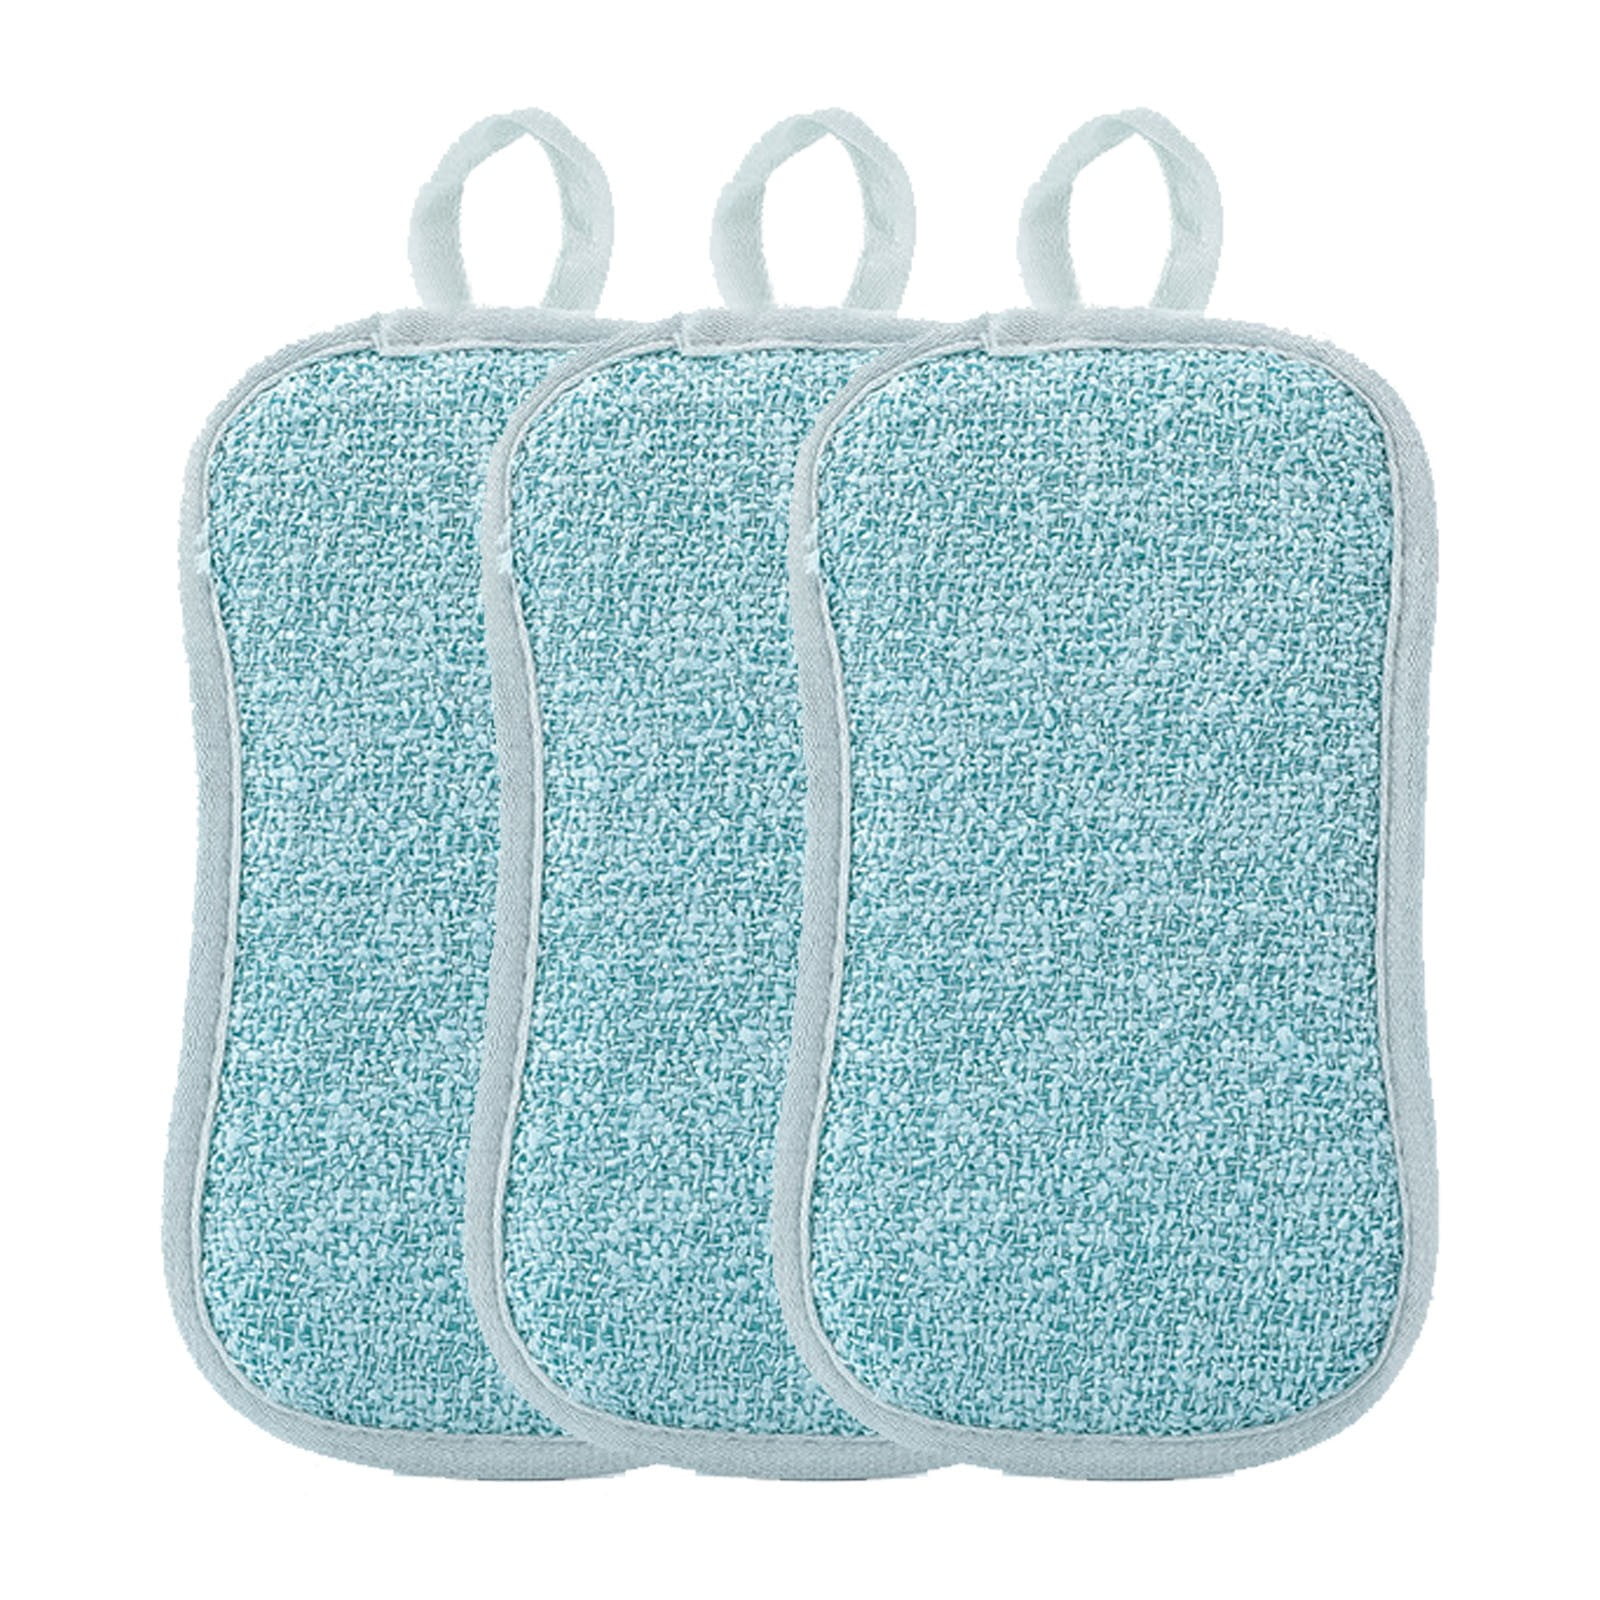 Rags Grease Dish Sponge Wiping Cloth Cleaning Towel Absorbent 2Sided ...